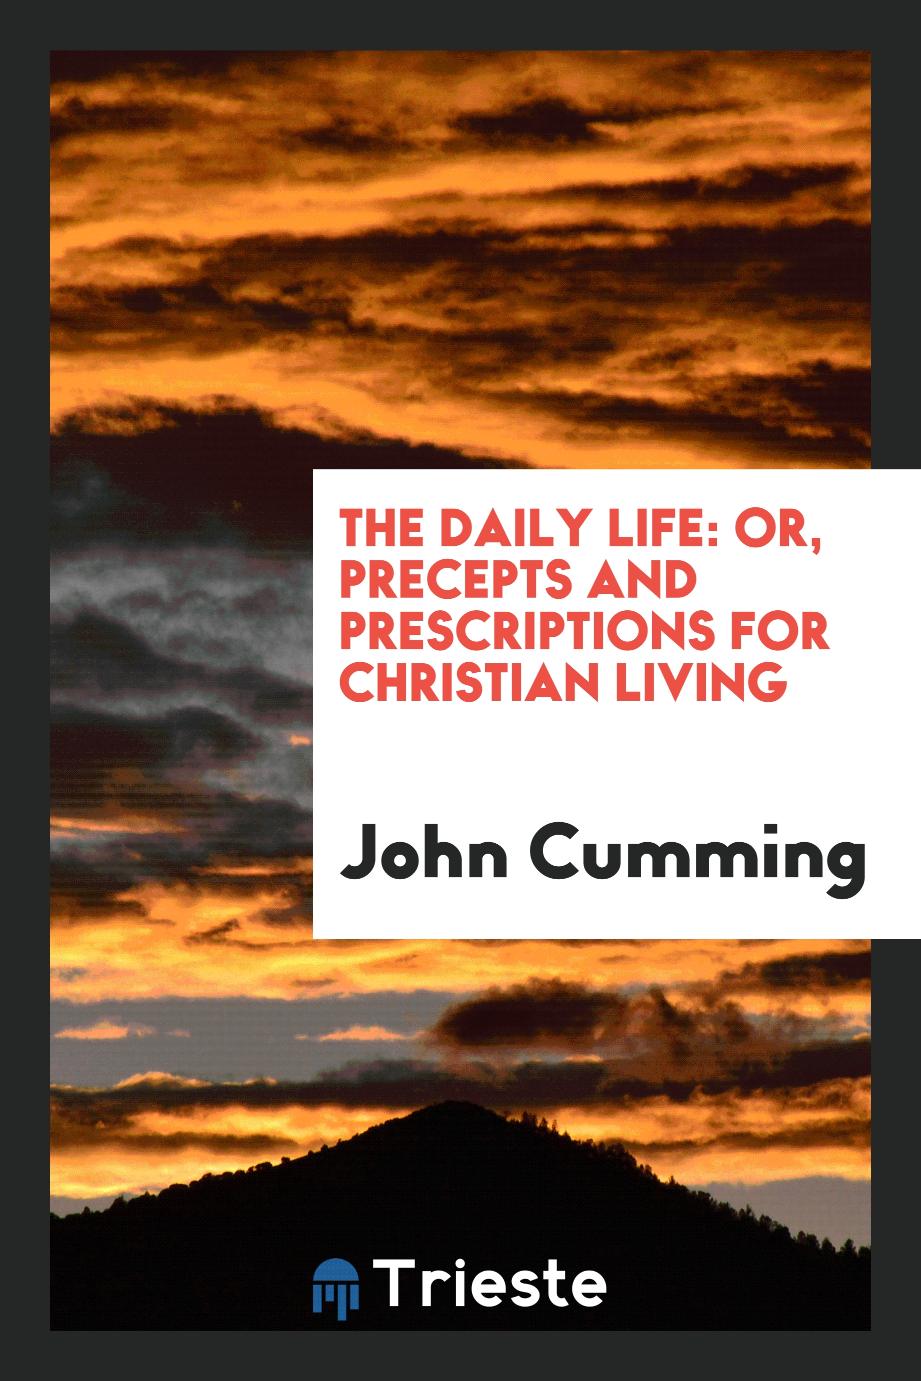 The Daily Life: Or, Precepts and Prescriptions for Christian Living